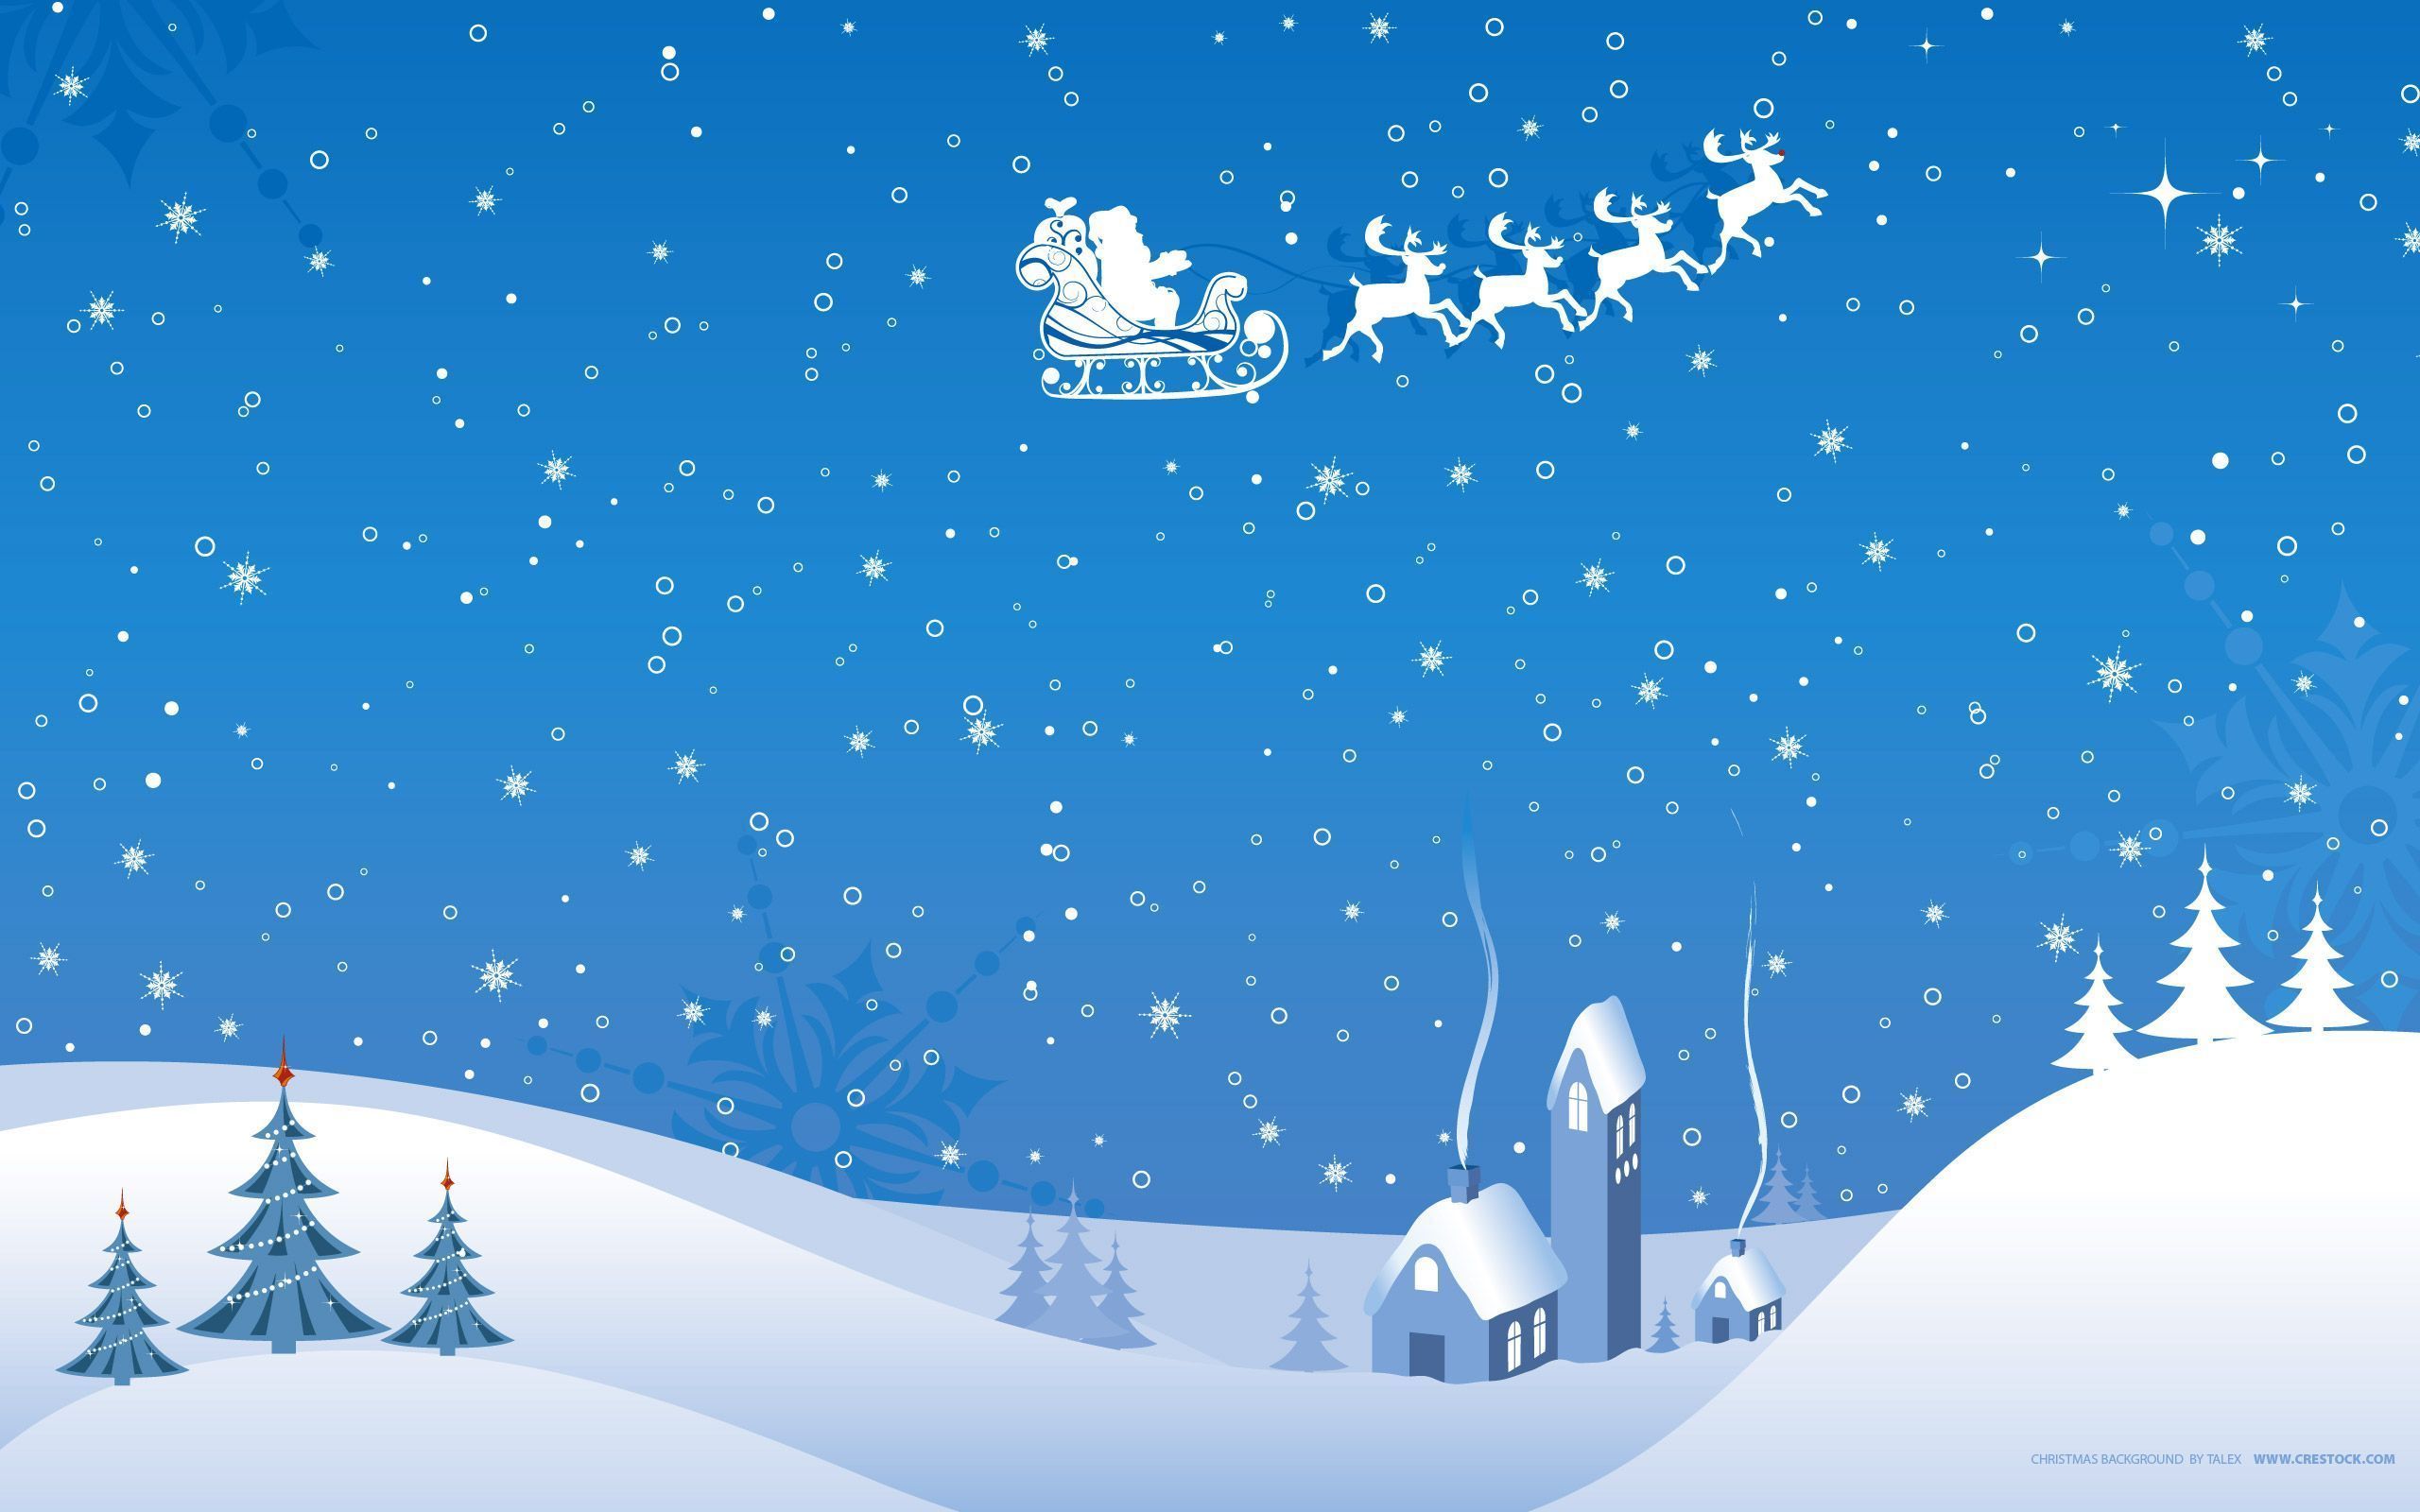 Christmas Wallpapers | Xmas HD Desktop Backgrounds - Page 8